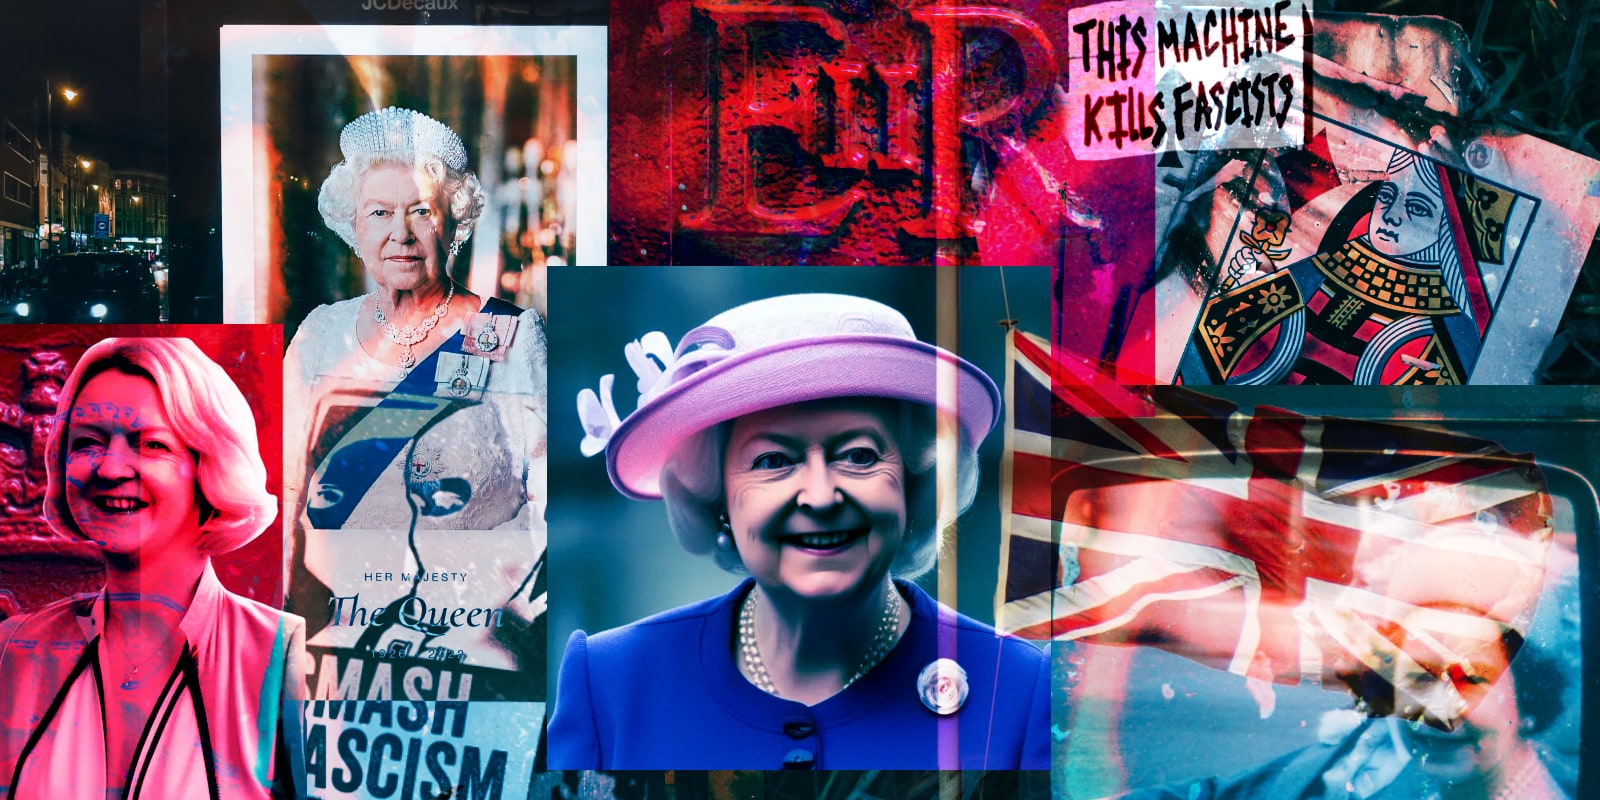 RC 371: Don't Truss It / Kings And Queens Liz Truss Elizabeth Windsor Her Majesty podcast mashup eclectic music cover